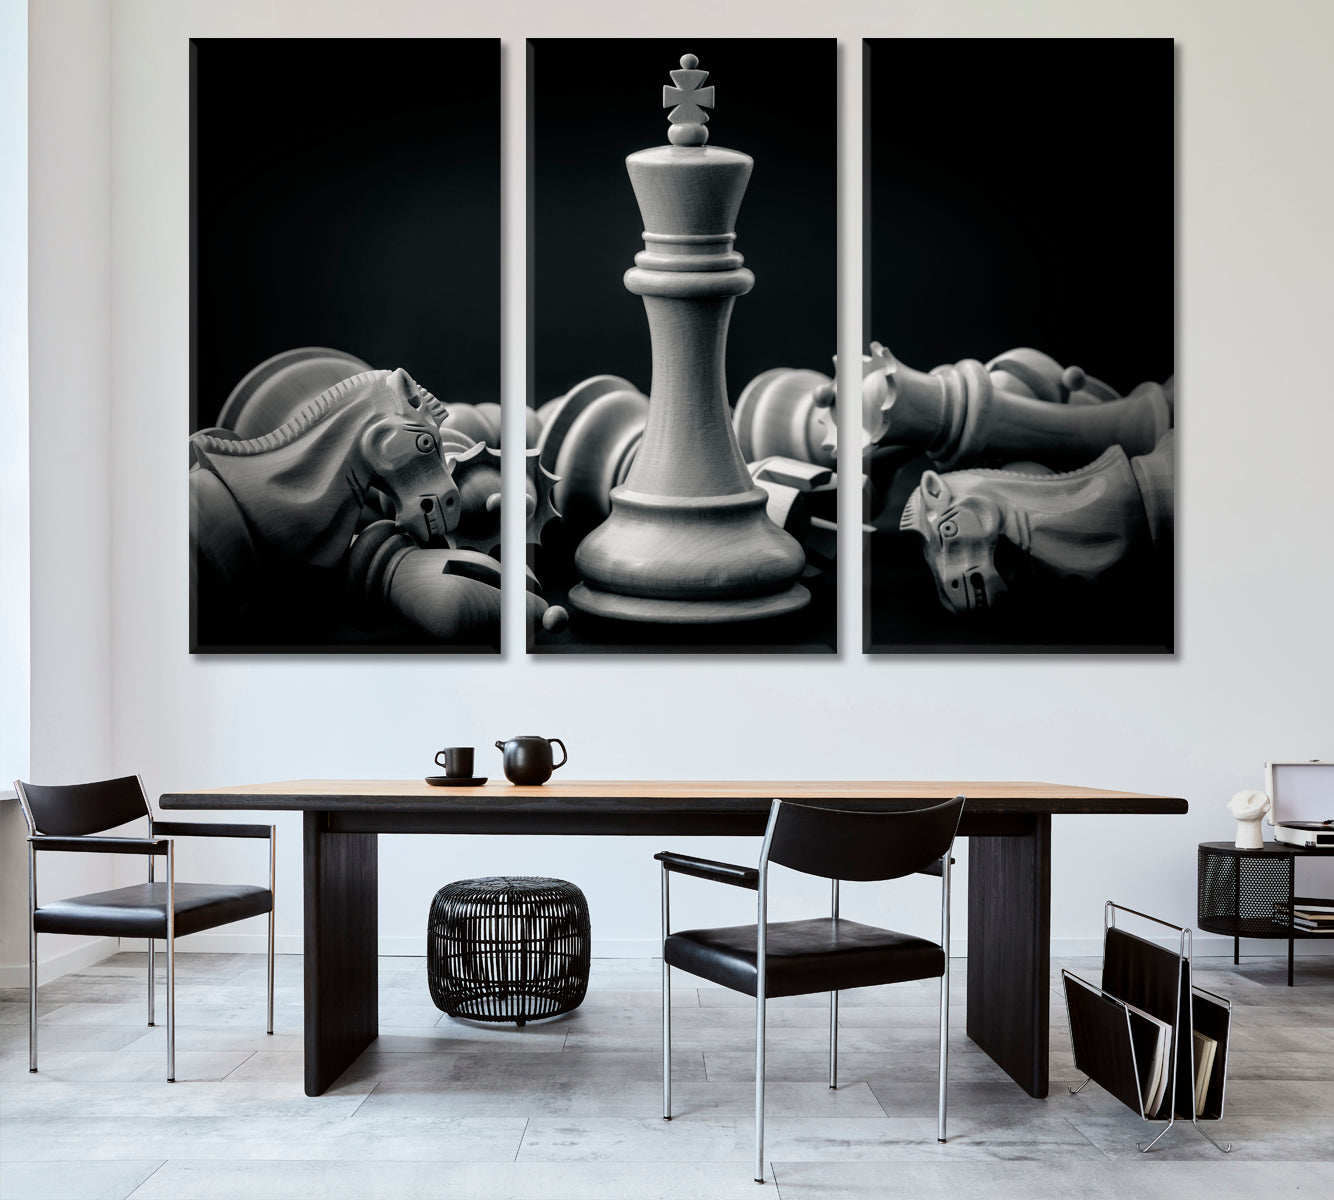 CHESS Black White King And Knight Leader Success Concept Poster Business Concept Wall Art Artesty 3 panels 36" x 24" 